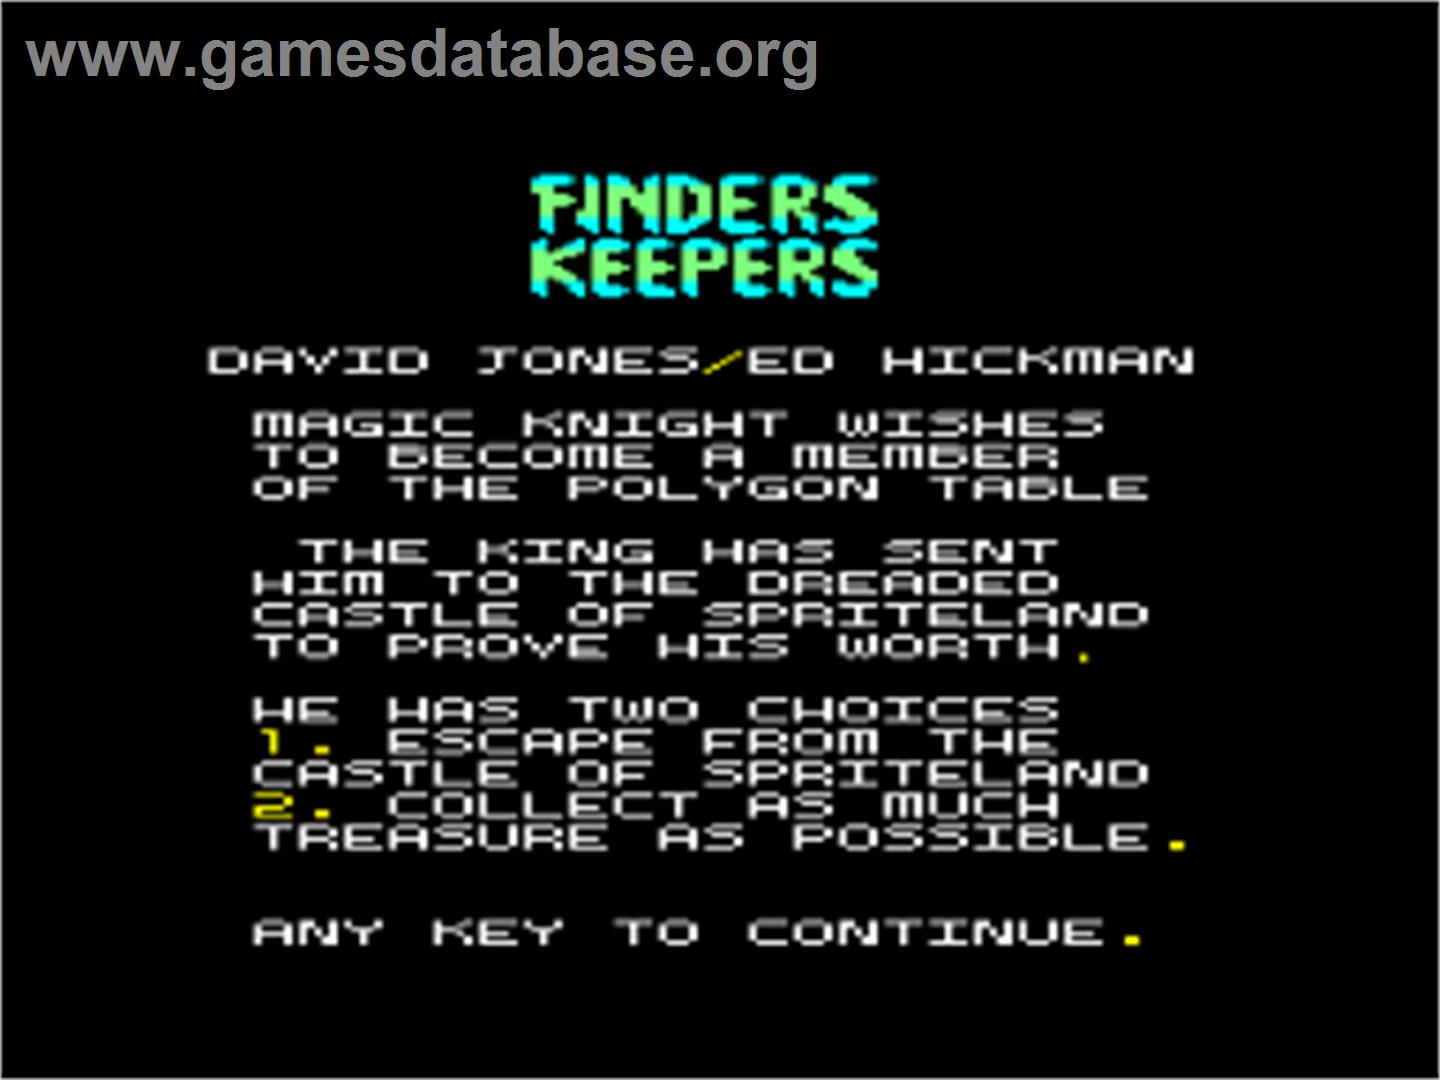 Finders Keepers - Amstrad CPC - Artwork - Title Screen